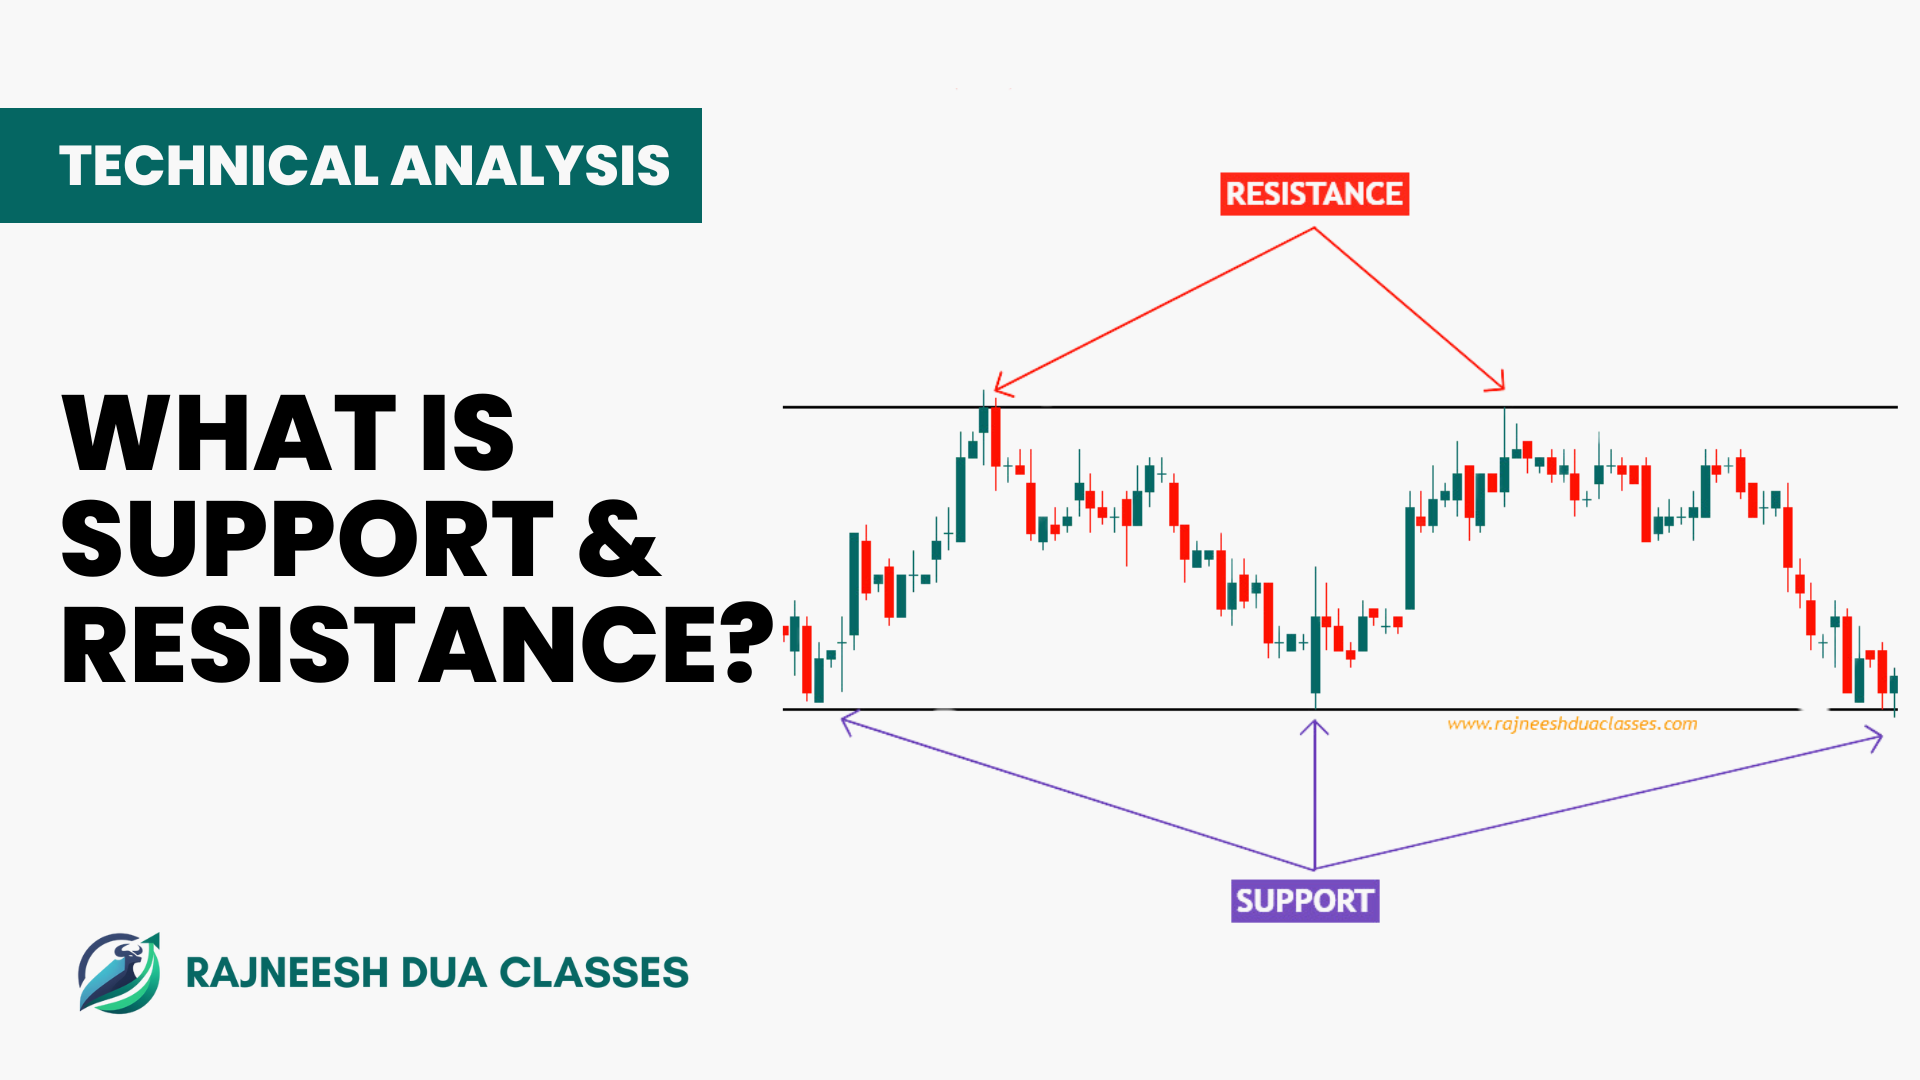 What is Support & Resistance?